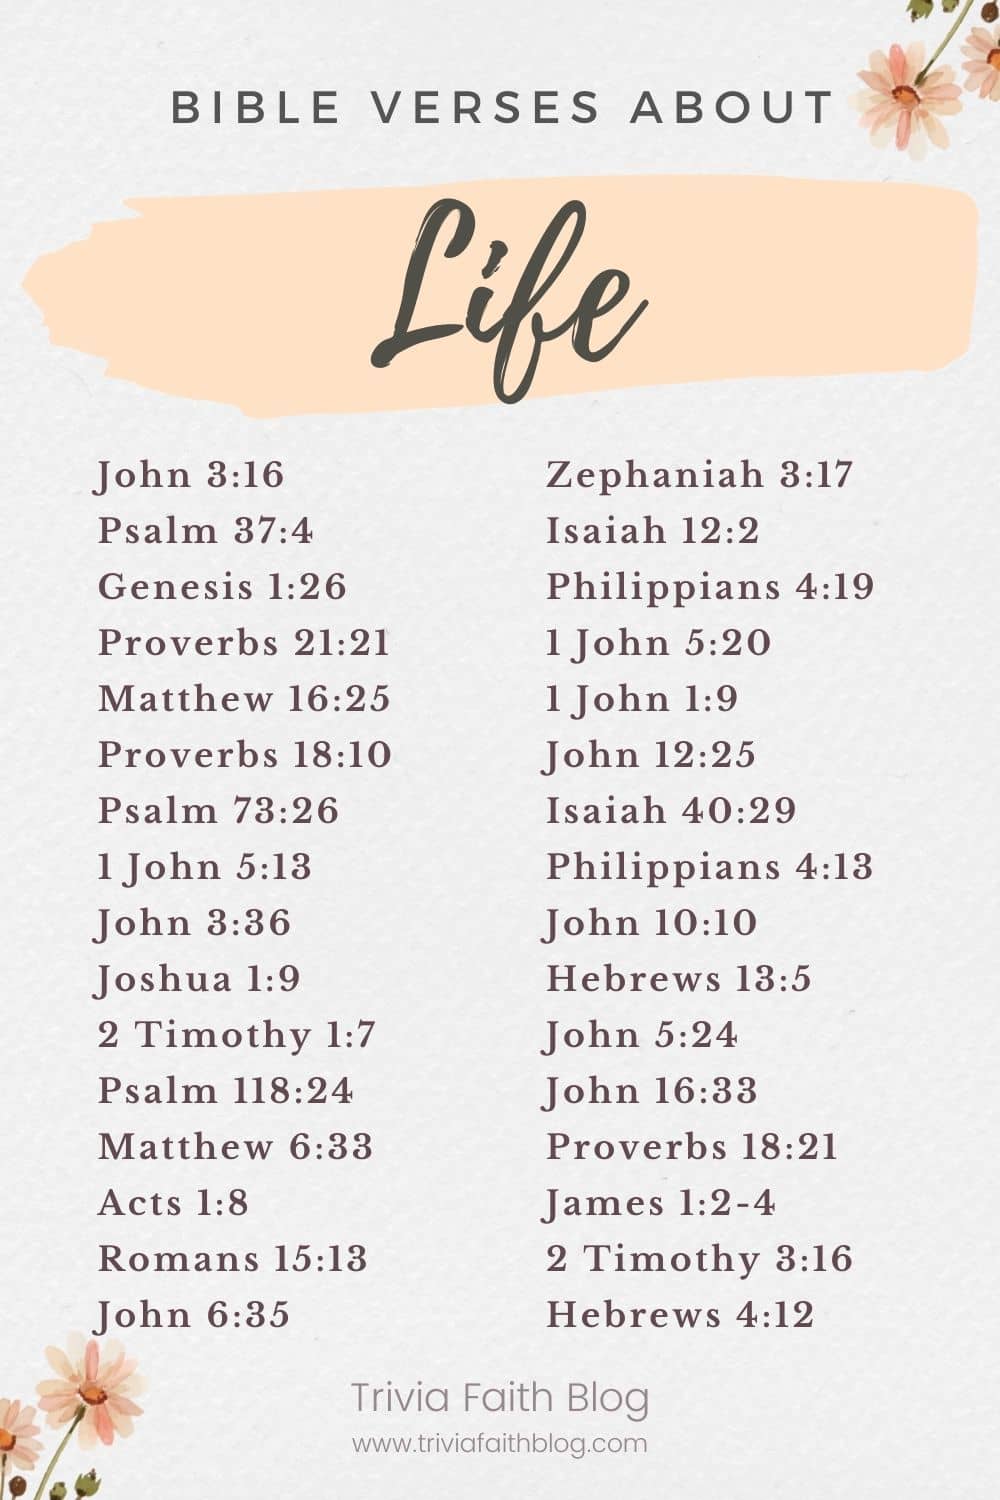 Bible verses about life kjv
Bible Verse Quotes About Life